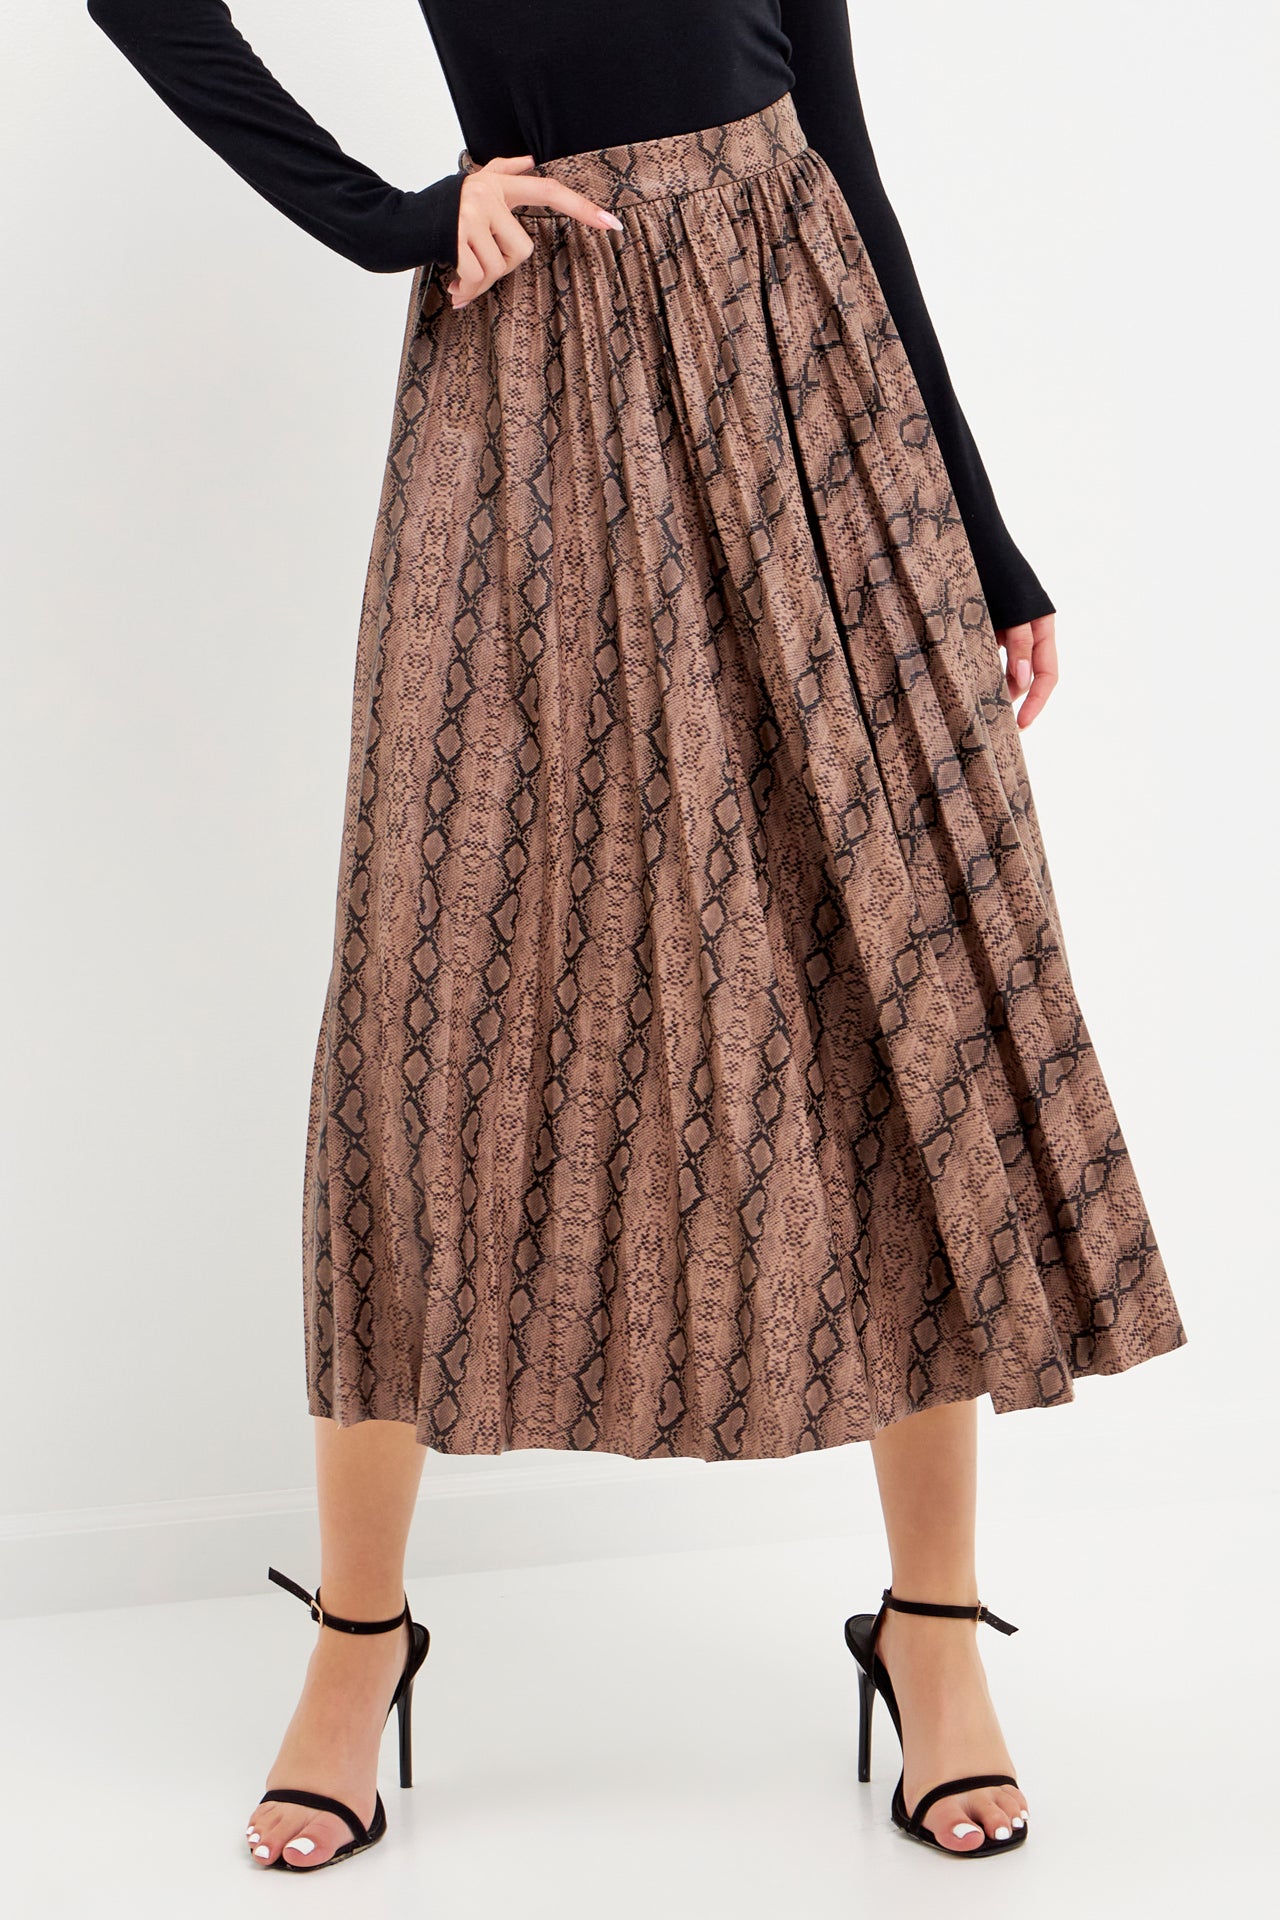 ENDLESS ROSE - Snake Print Pleated Midi Skirt - SKIRTS available at Objectrare